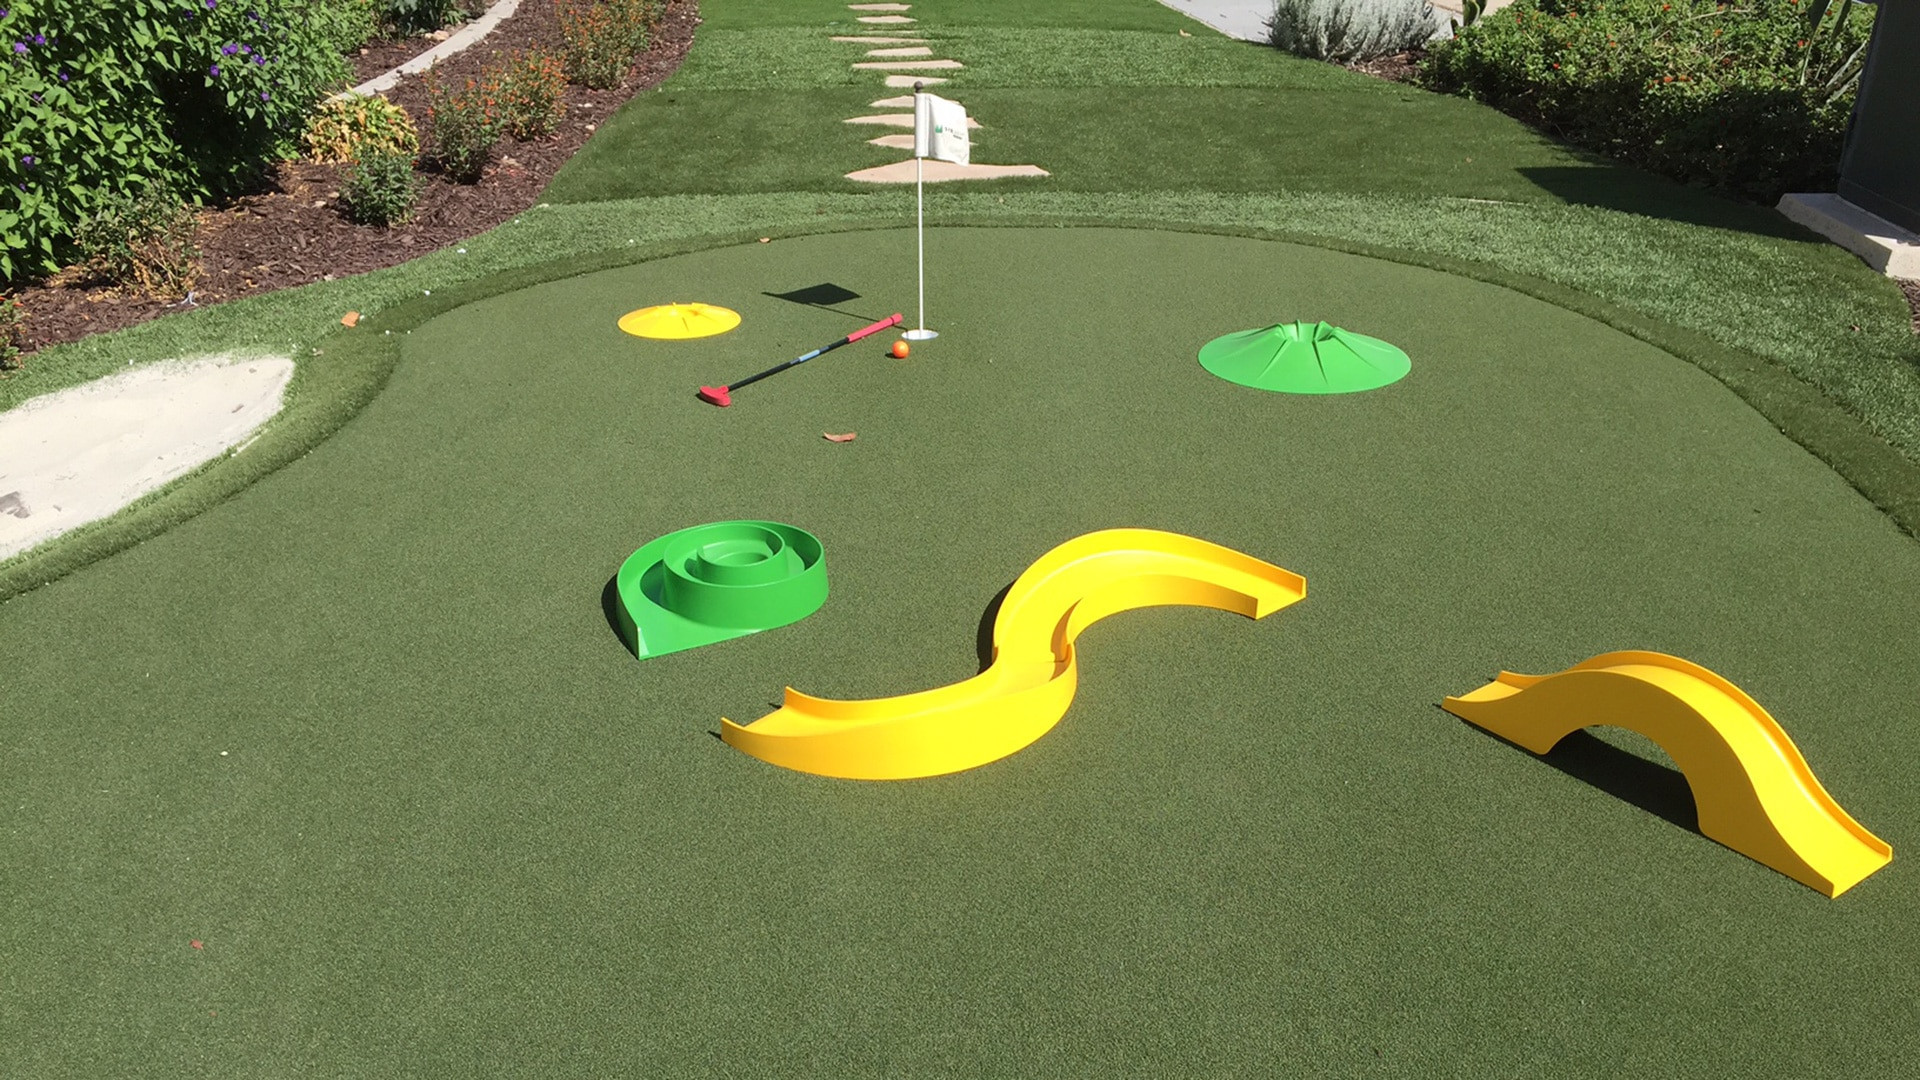 Backyard Miniature Golf Course Kits
 5 Ways to Add Outdoor Play to Your Yard SYNLawn